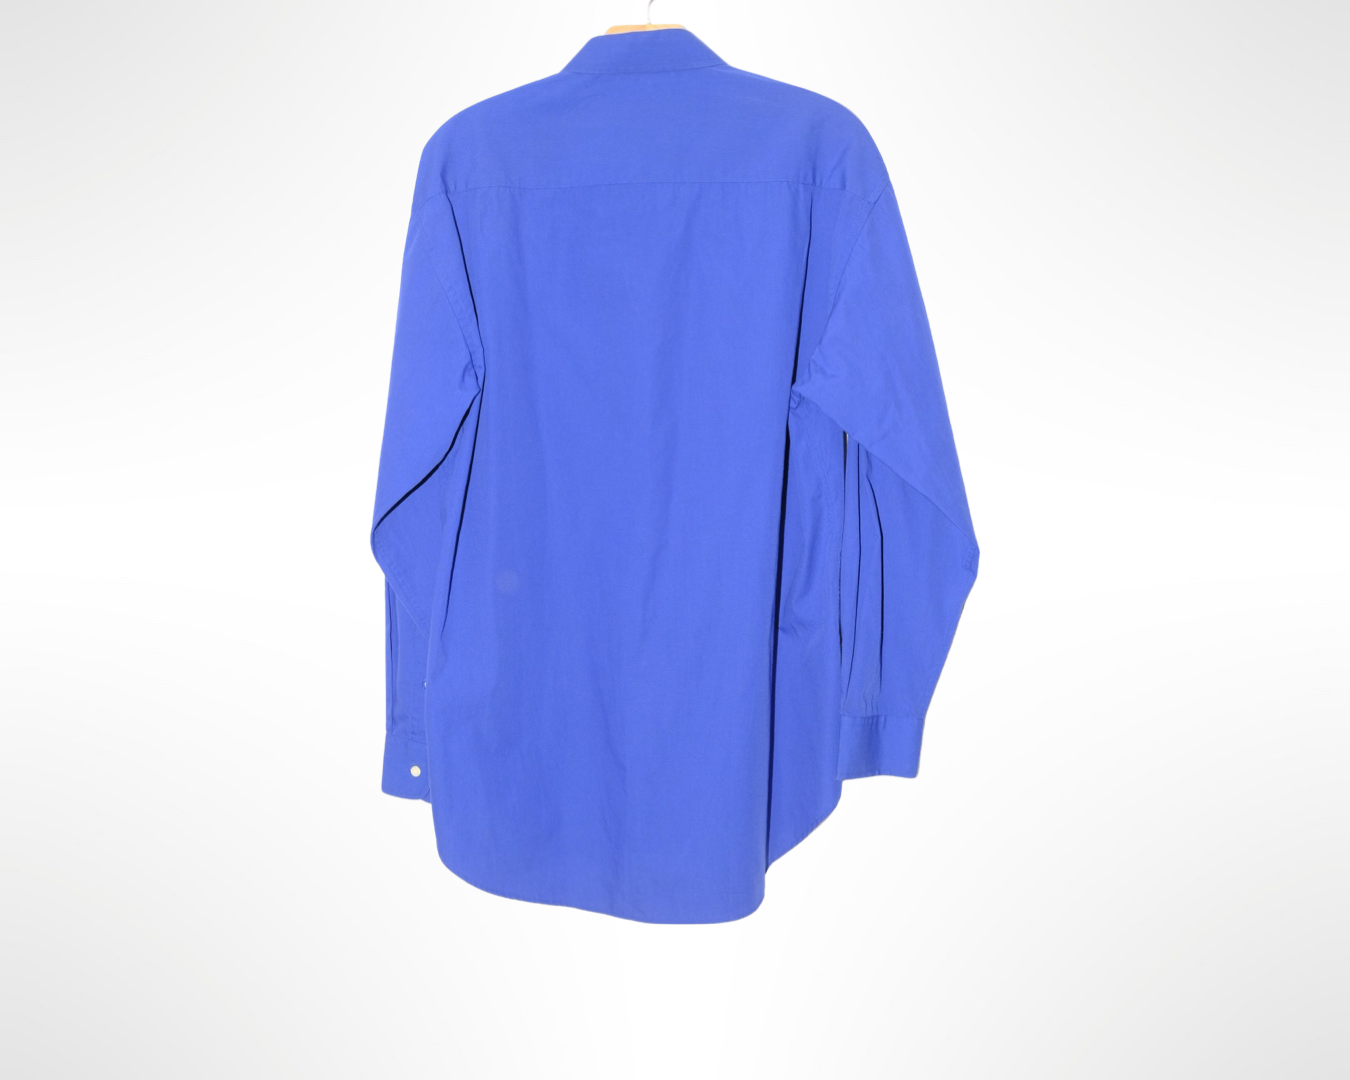 givenchy royal blue button down